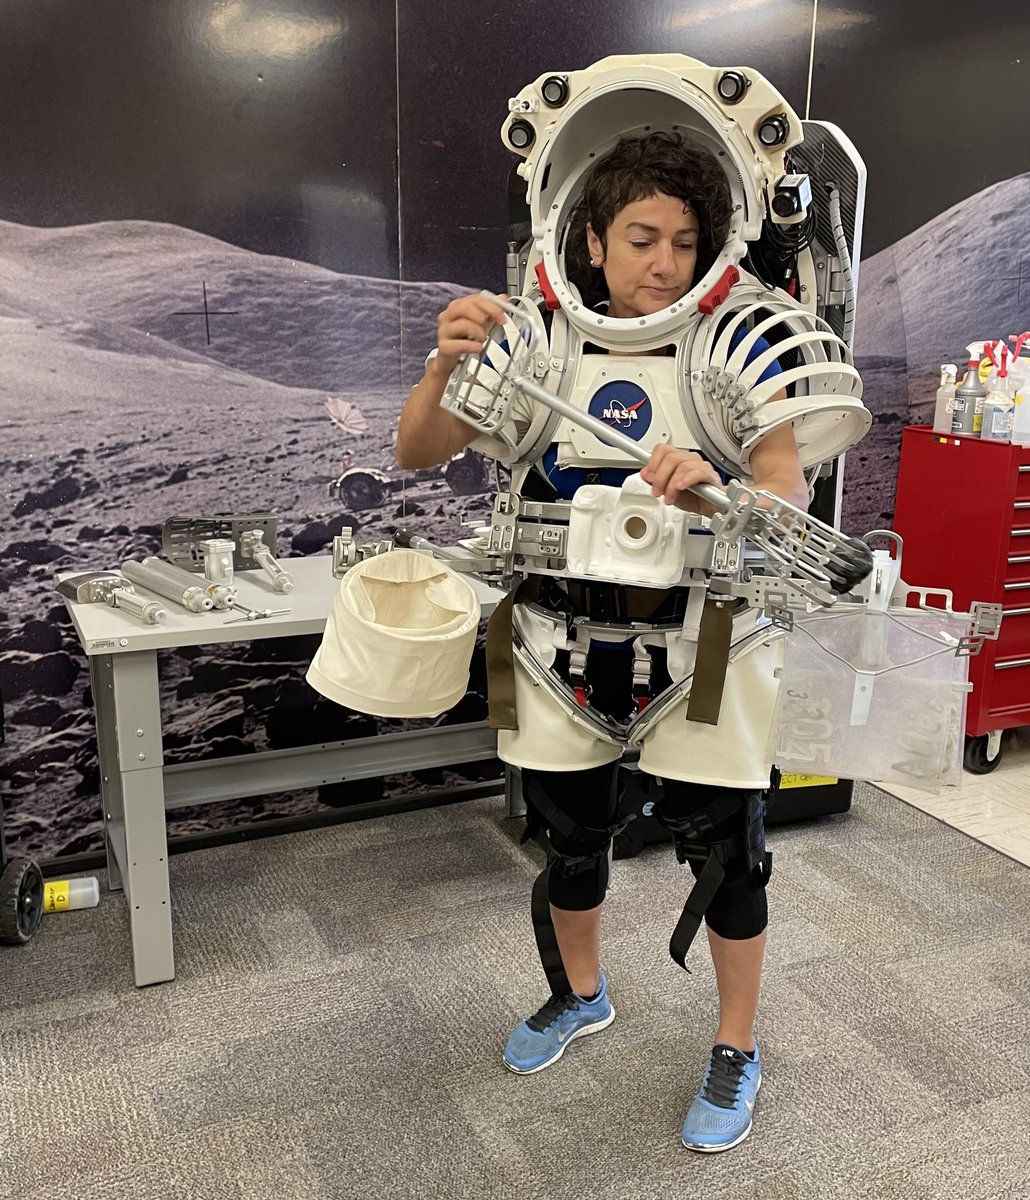 I will wear this Atlas Excon suit for an upcoming JETT (Joint Extravehicular Activity and Human Surface Mobility Program Test Team) mission in Arizona to help develop and refine techniques and technology to explore and conduct science on our @NASAArtemis missions to the Moon.